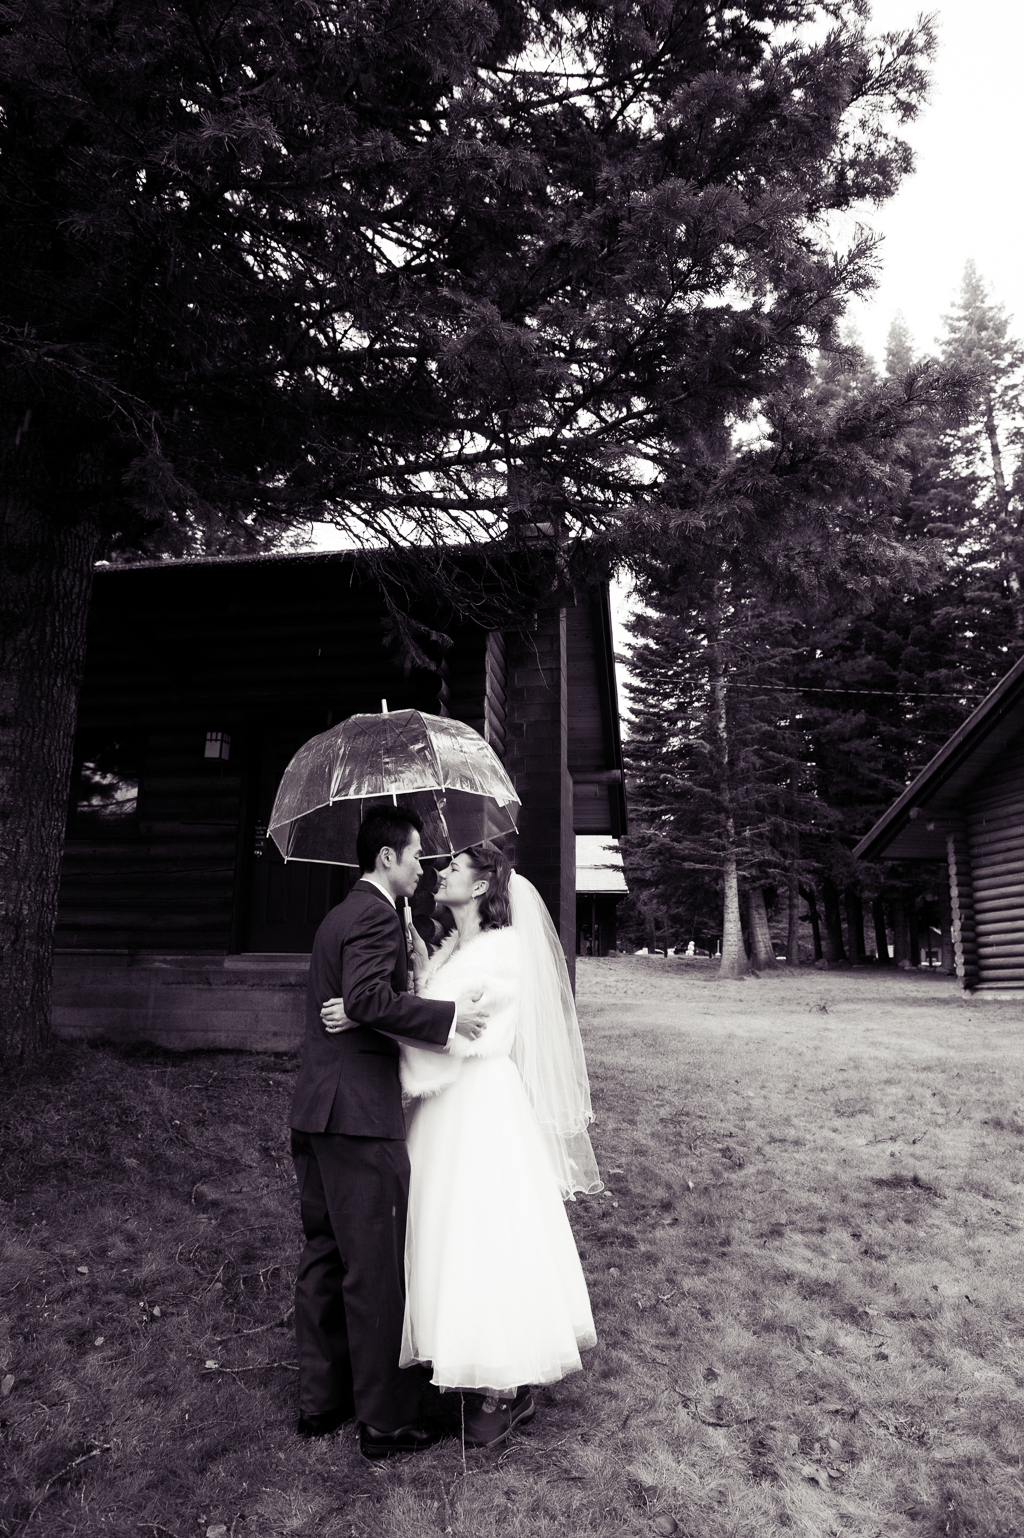 bride and groom share a moment under a clear umbrella in the rain